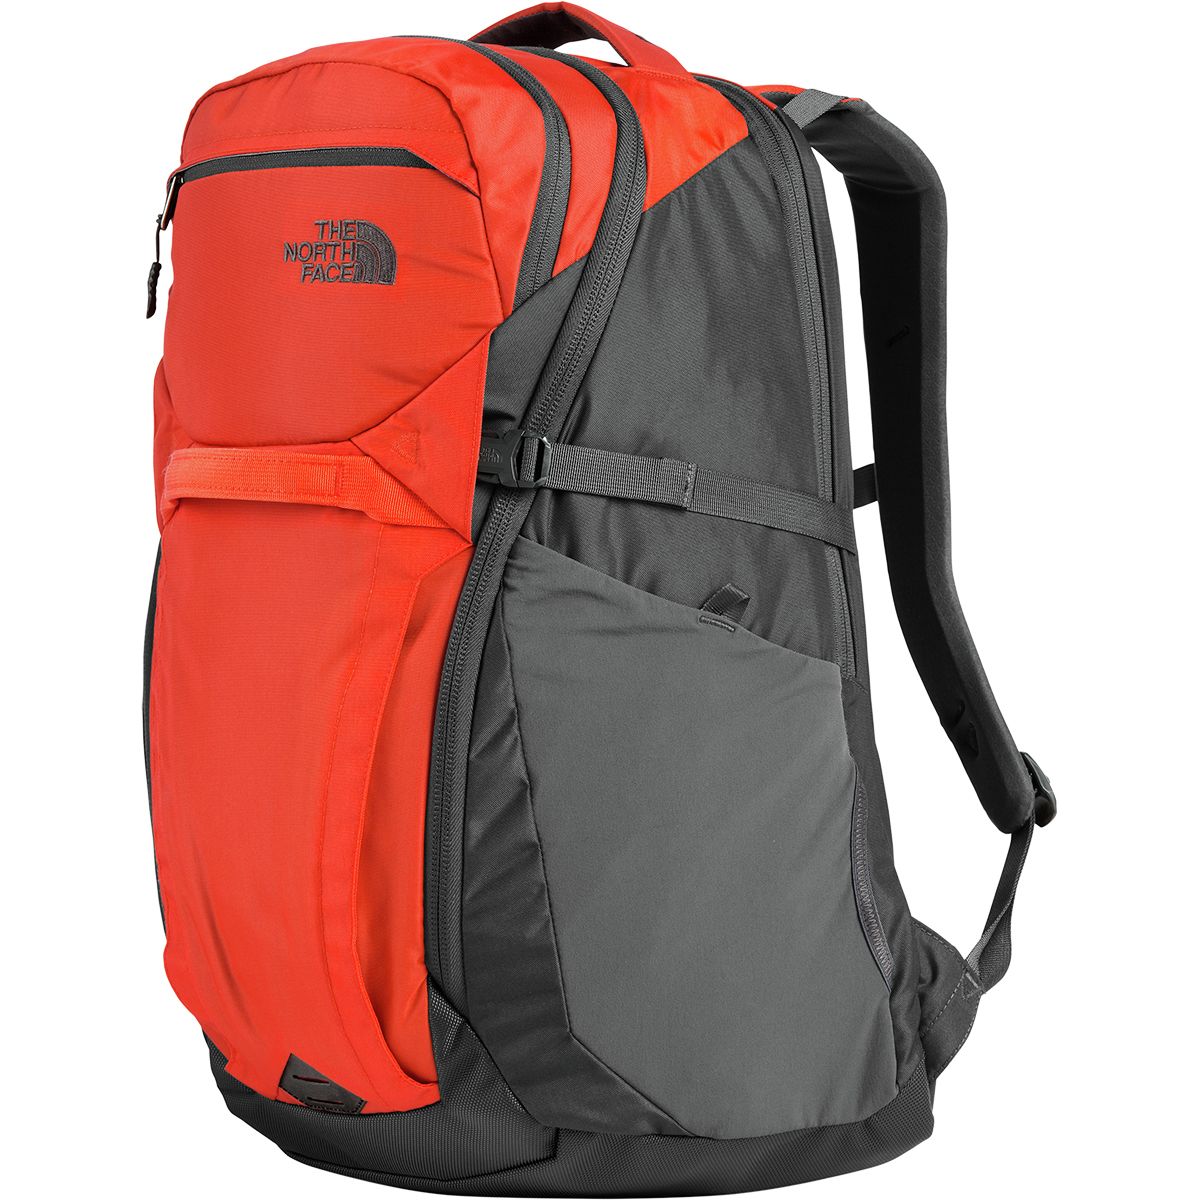 40l backpack north face